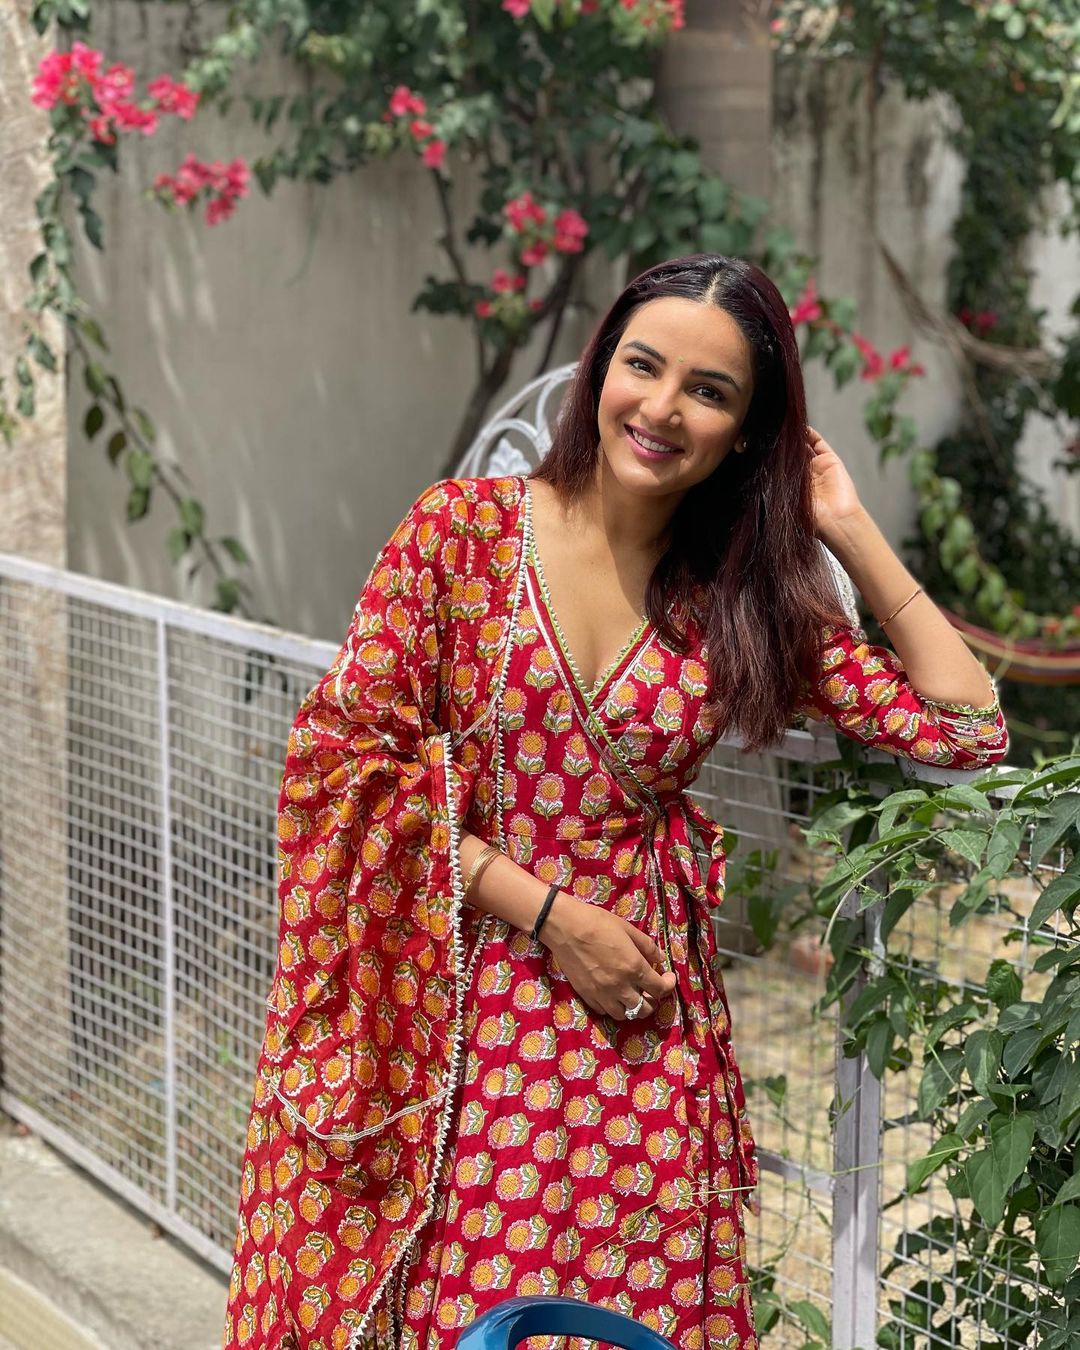 Jasmin Bhasin looks beautiful in the red cotton suit.